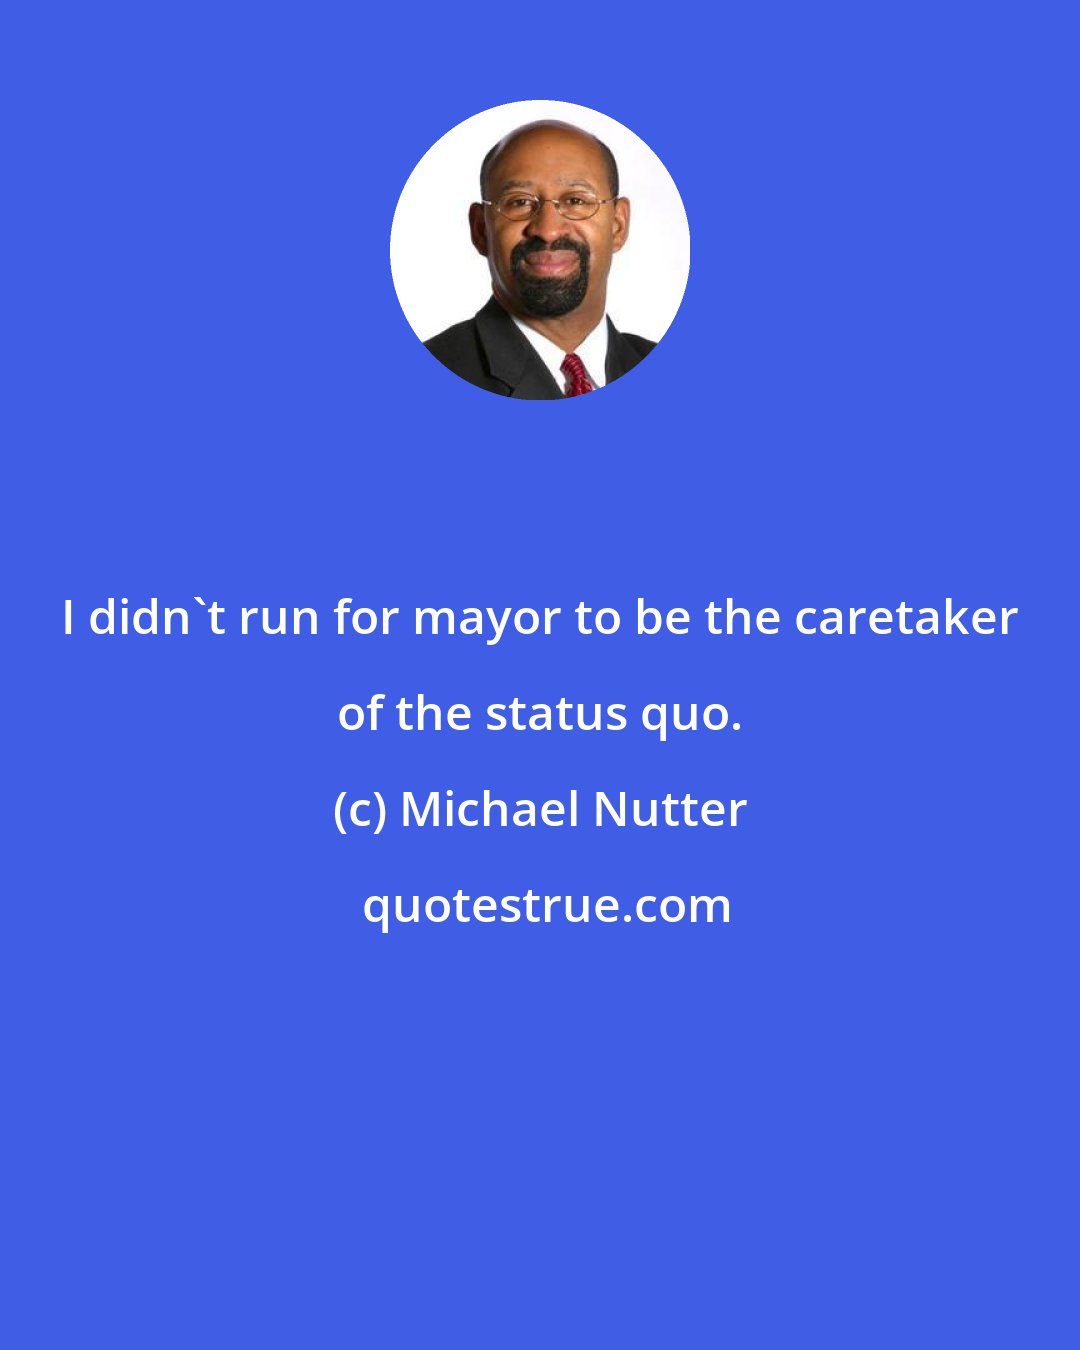 Michael Nutter: I didn't run for mayor to be the caretaker of the status quo.